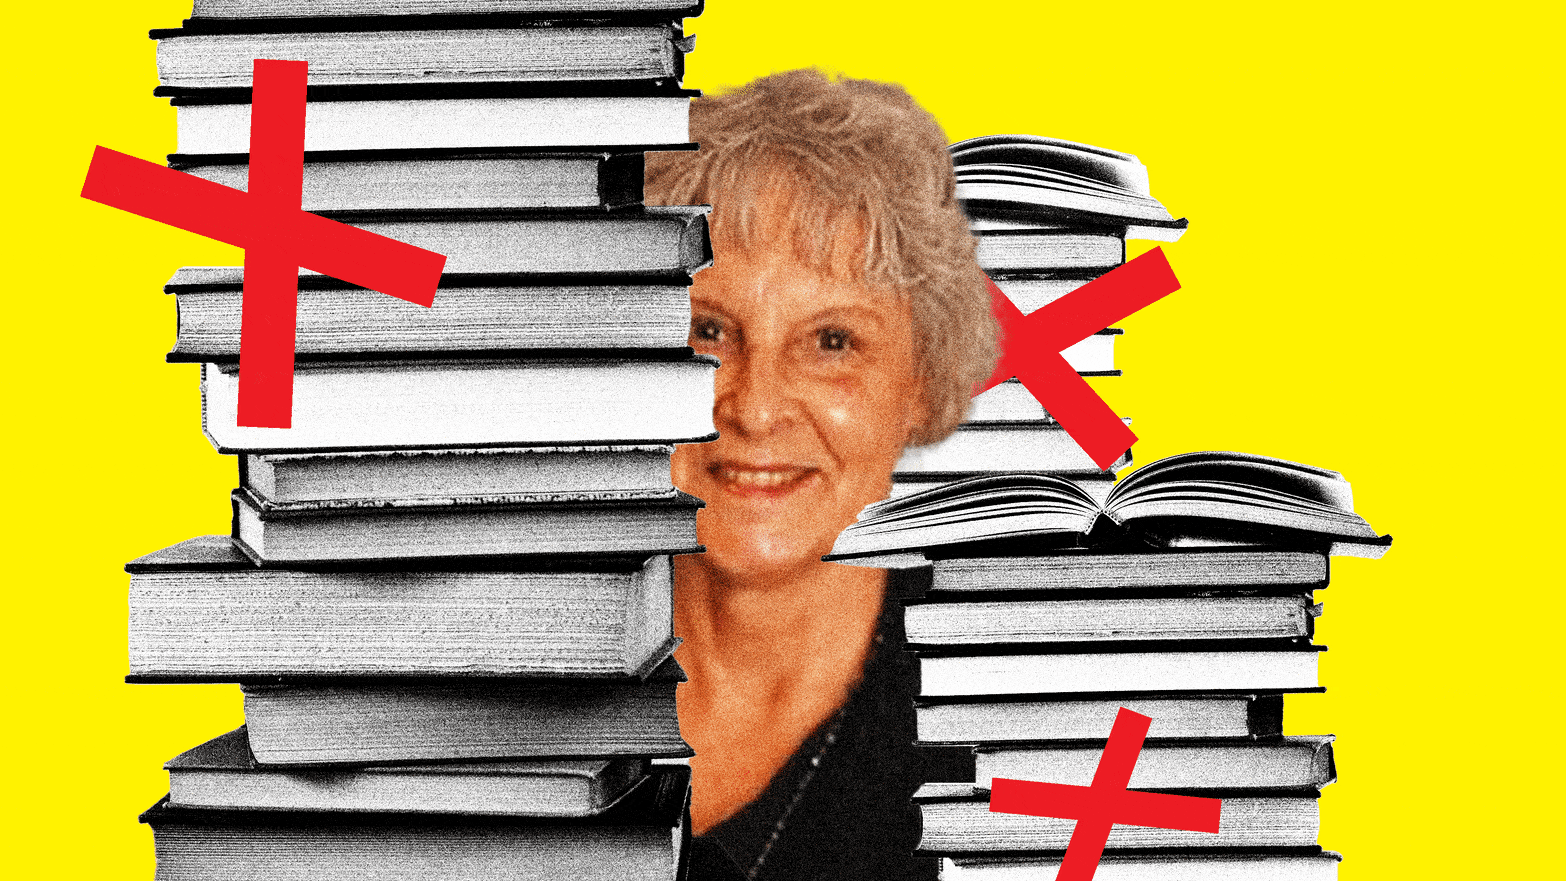 A gif shows Granbury ISD Board Member Karen Lowery in a stack of books while floating red X’s flash across the books.